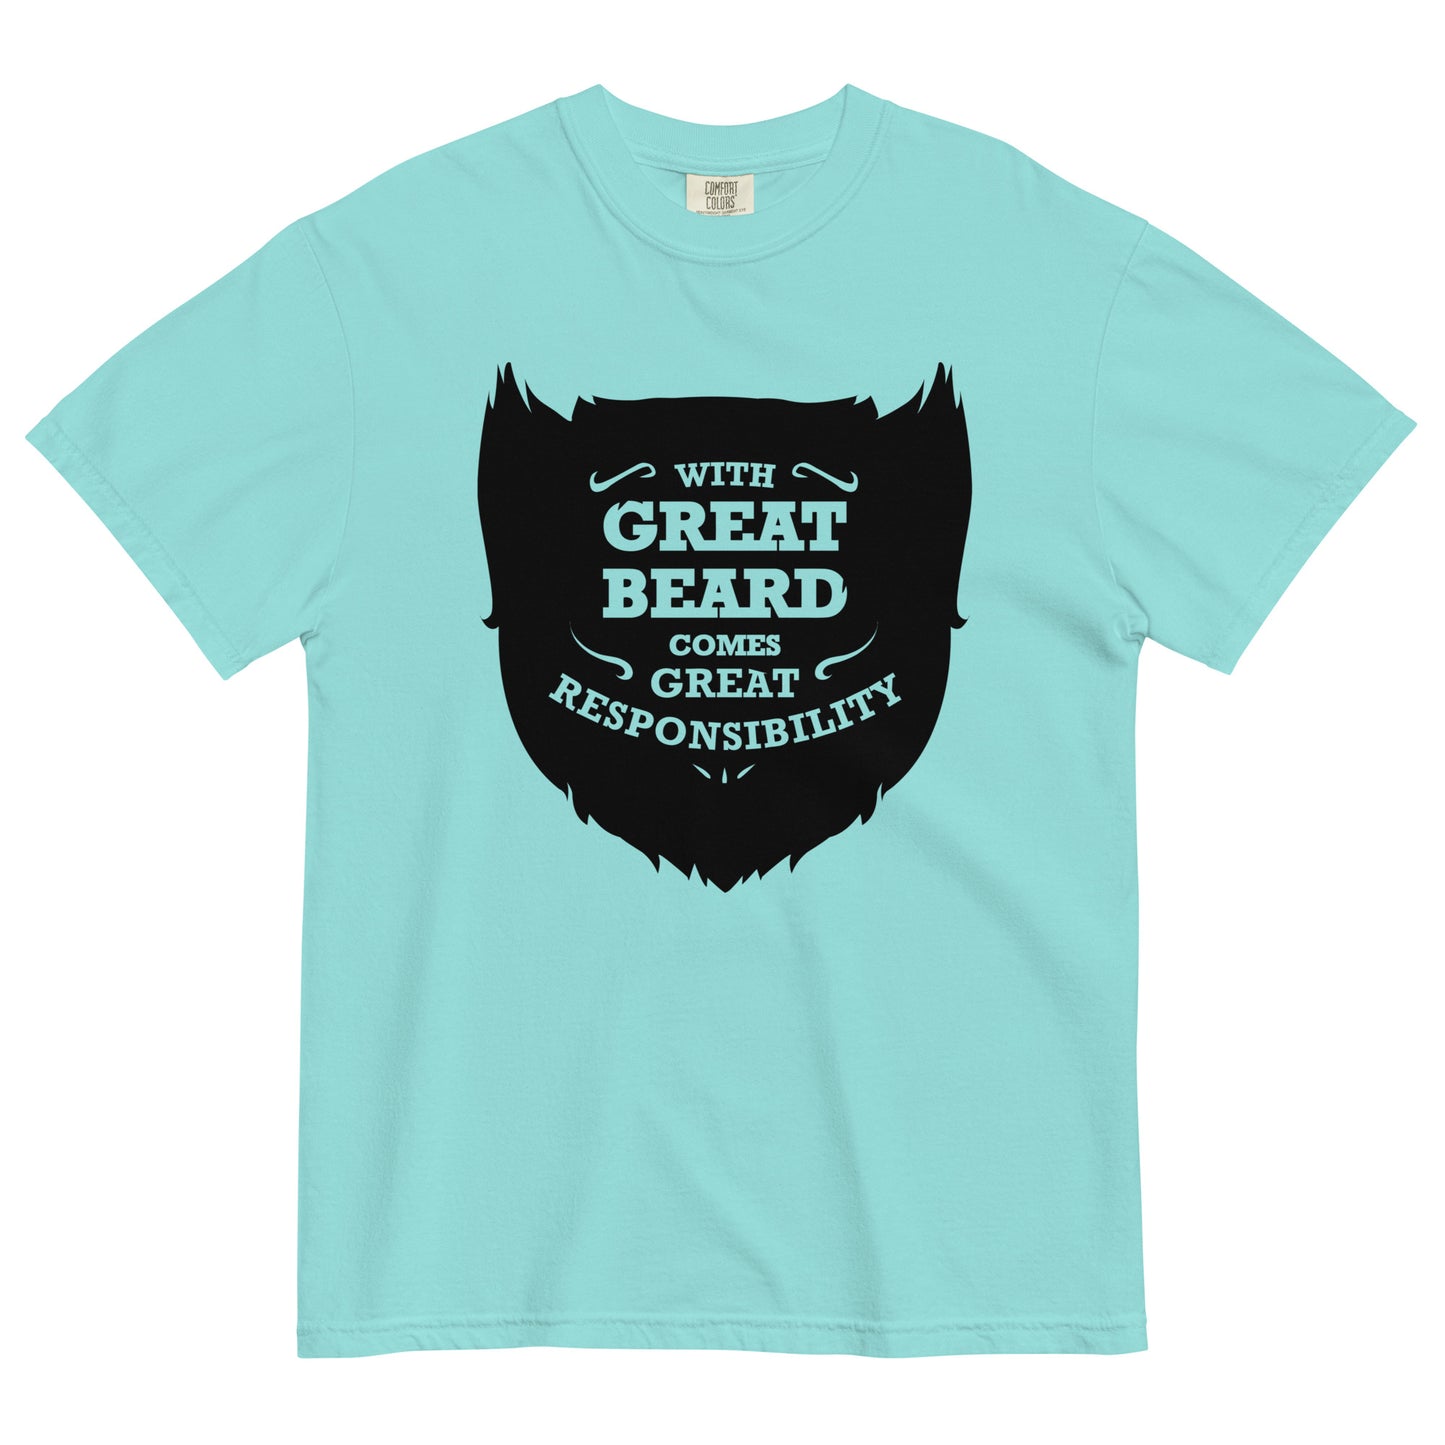 With Great Beard Comes Great Responsibility Men's Relaxed Fit Tee